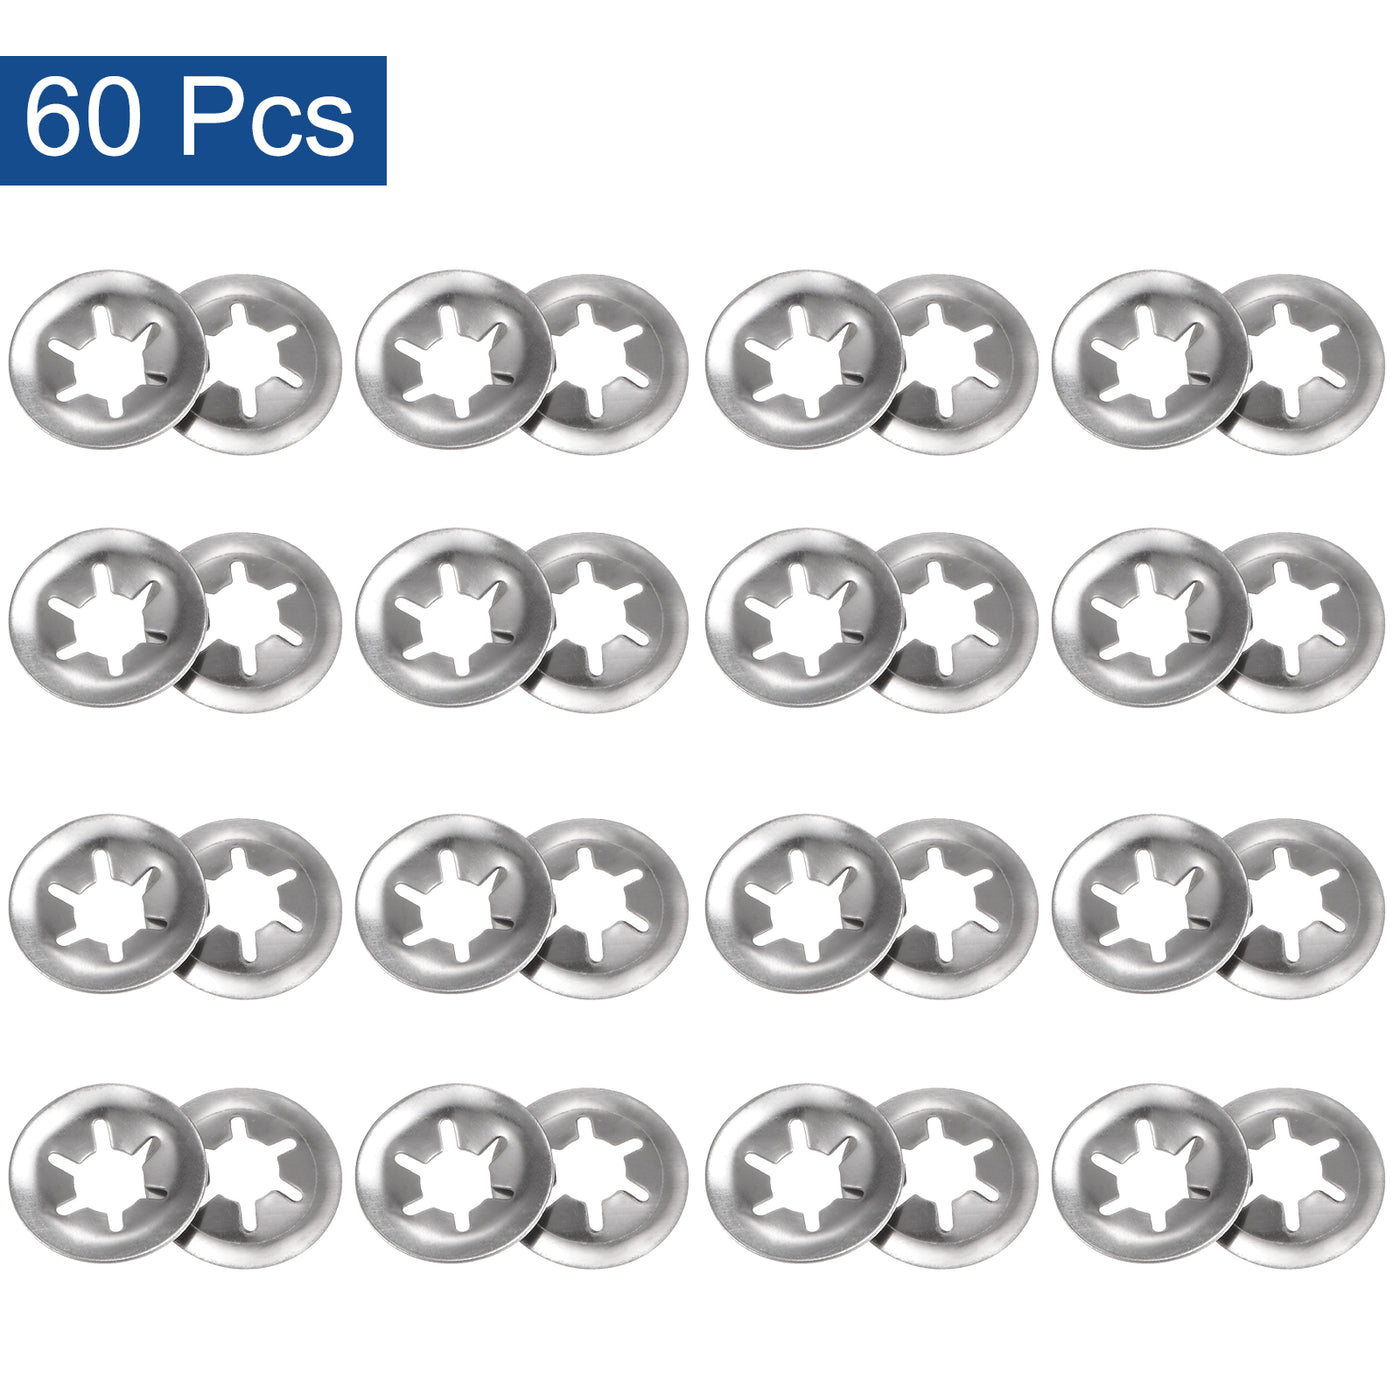 uxcell Uxcell 60pcs Internal Tooth Star Lock Washers M6 Stainless Steel Starlock Push Nuts